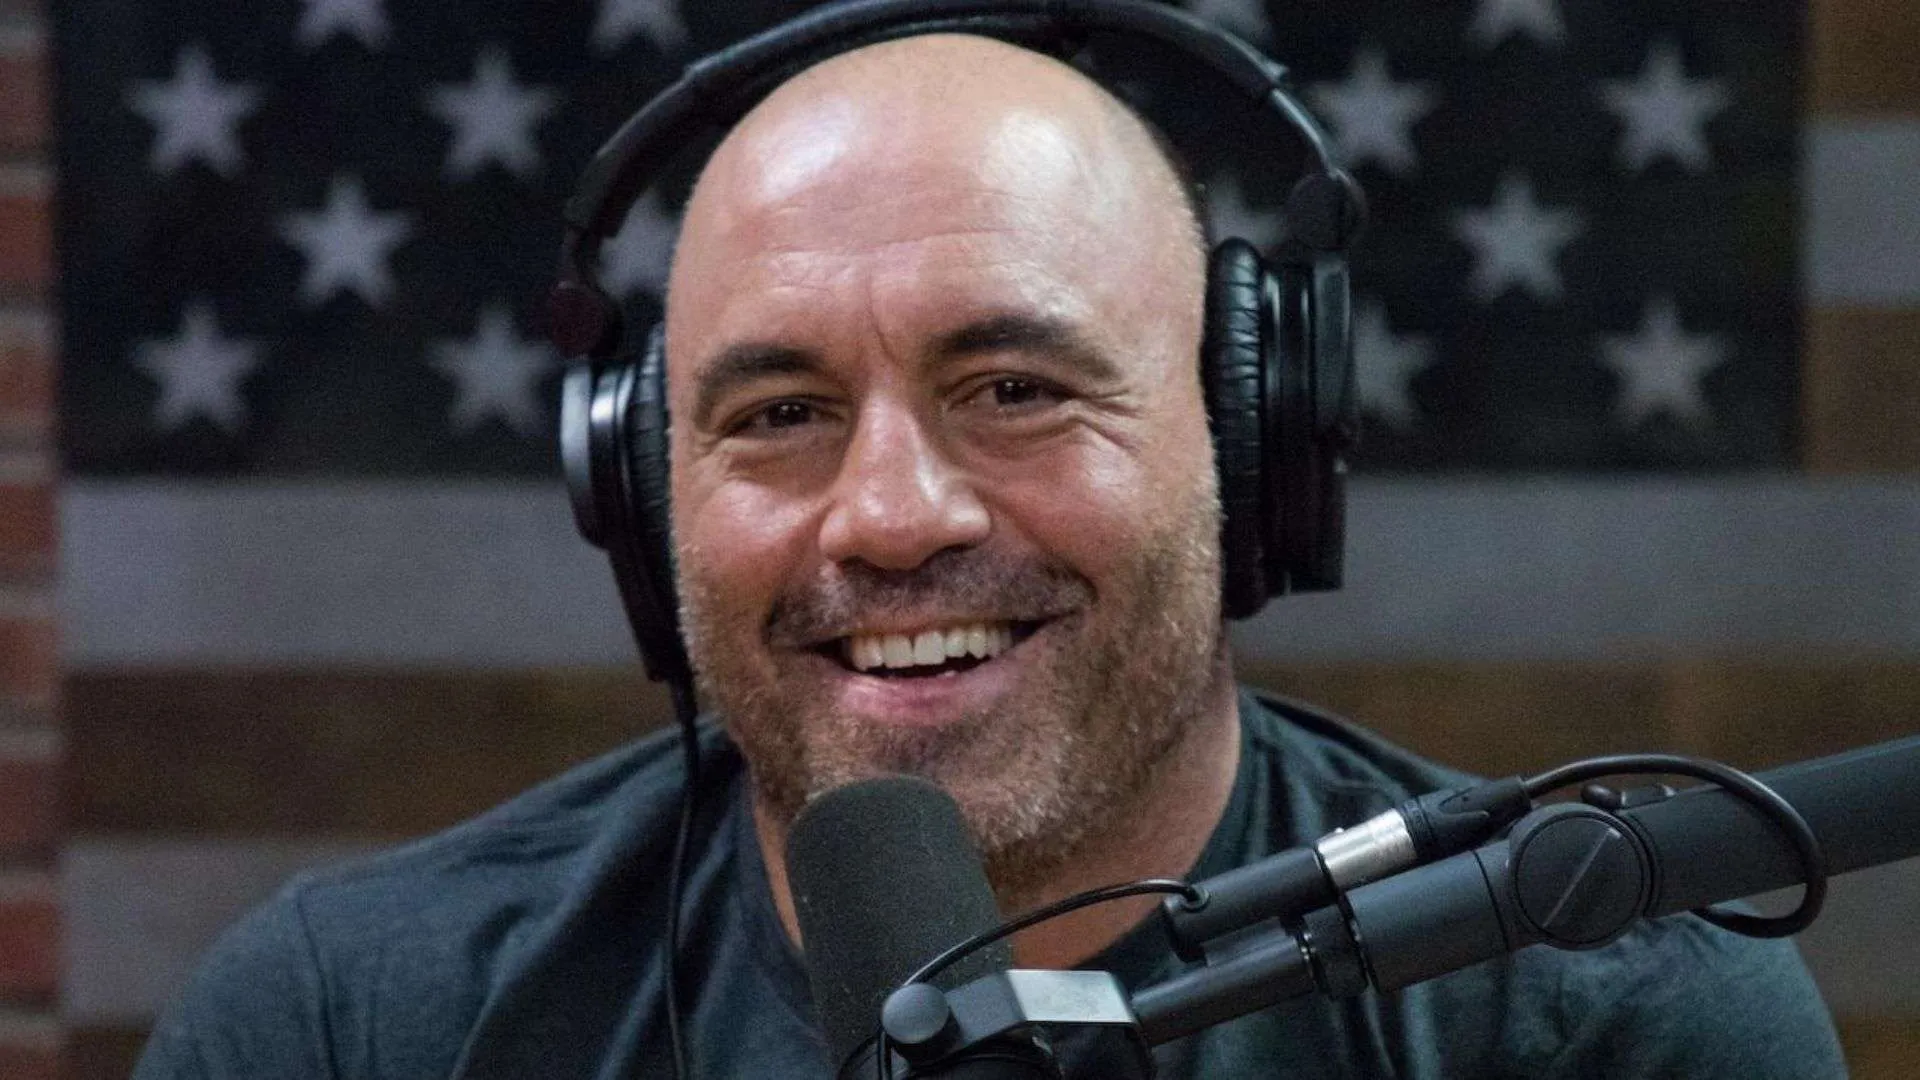 Joe Rogan Lessons Approach With Passion